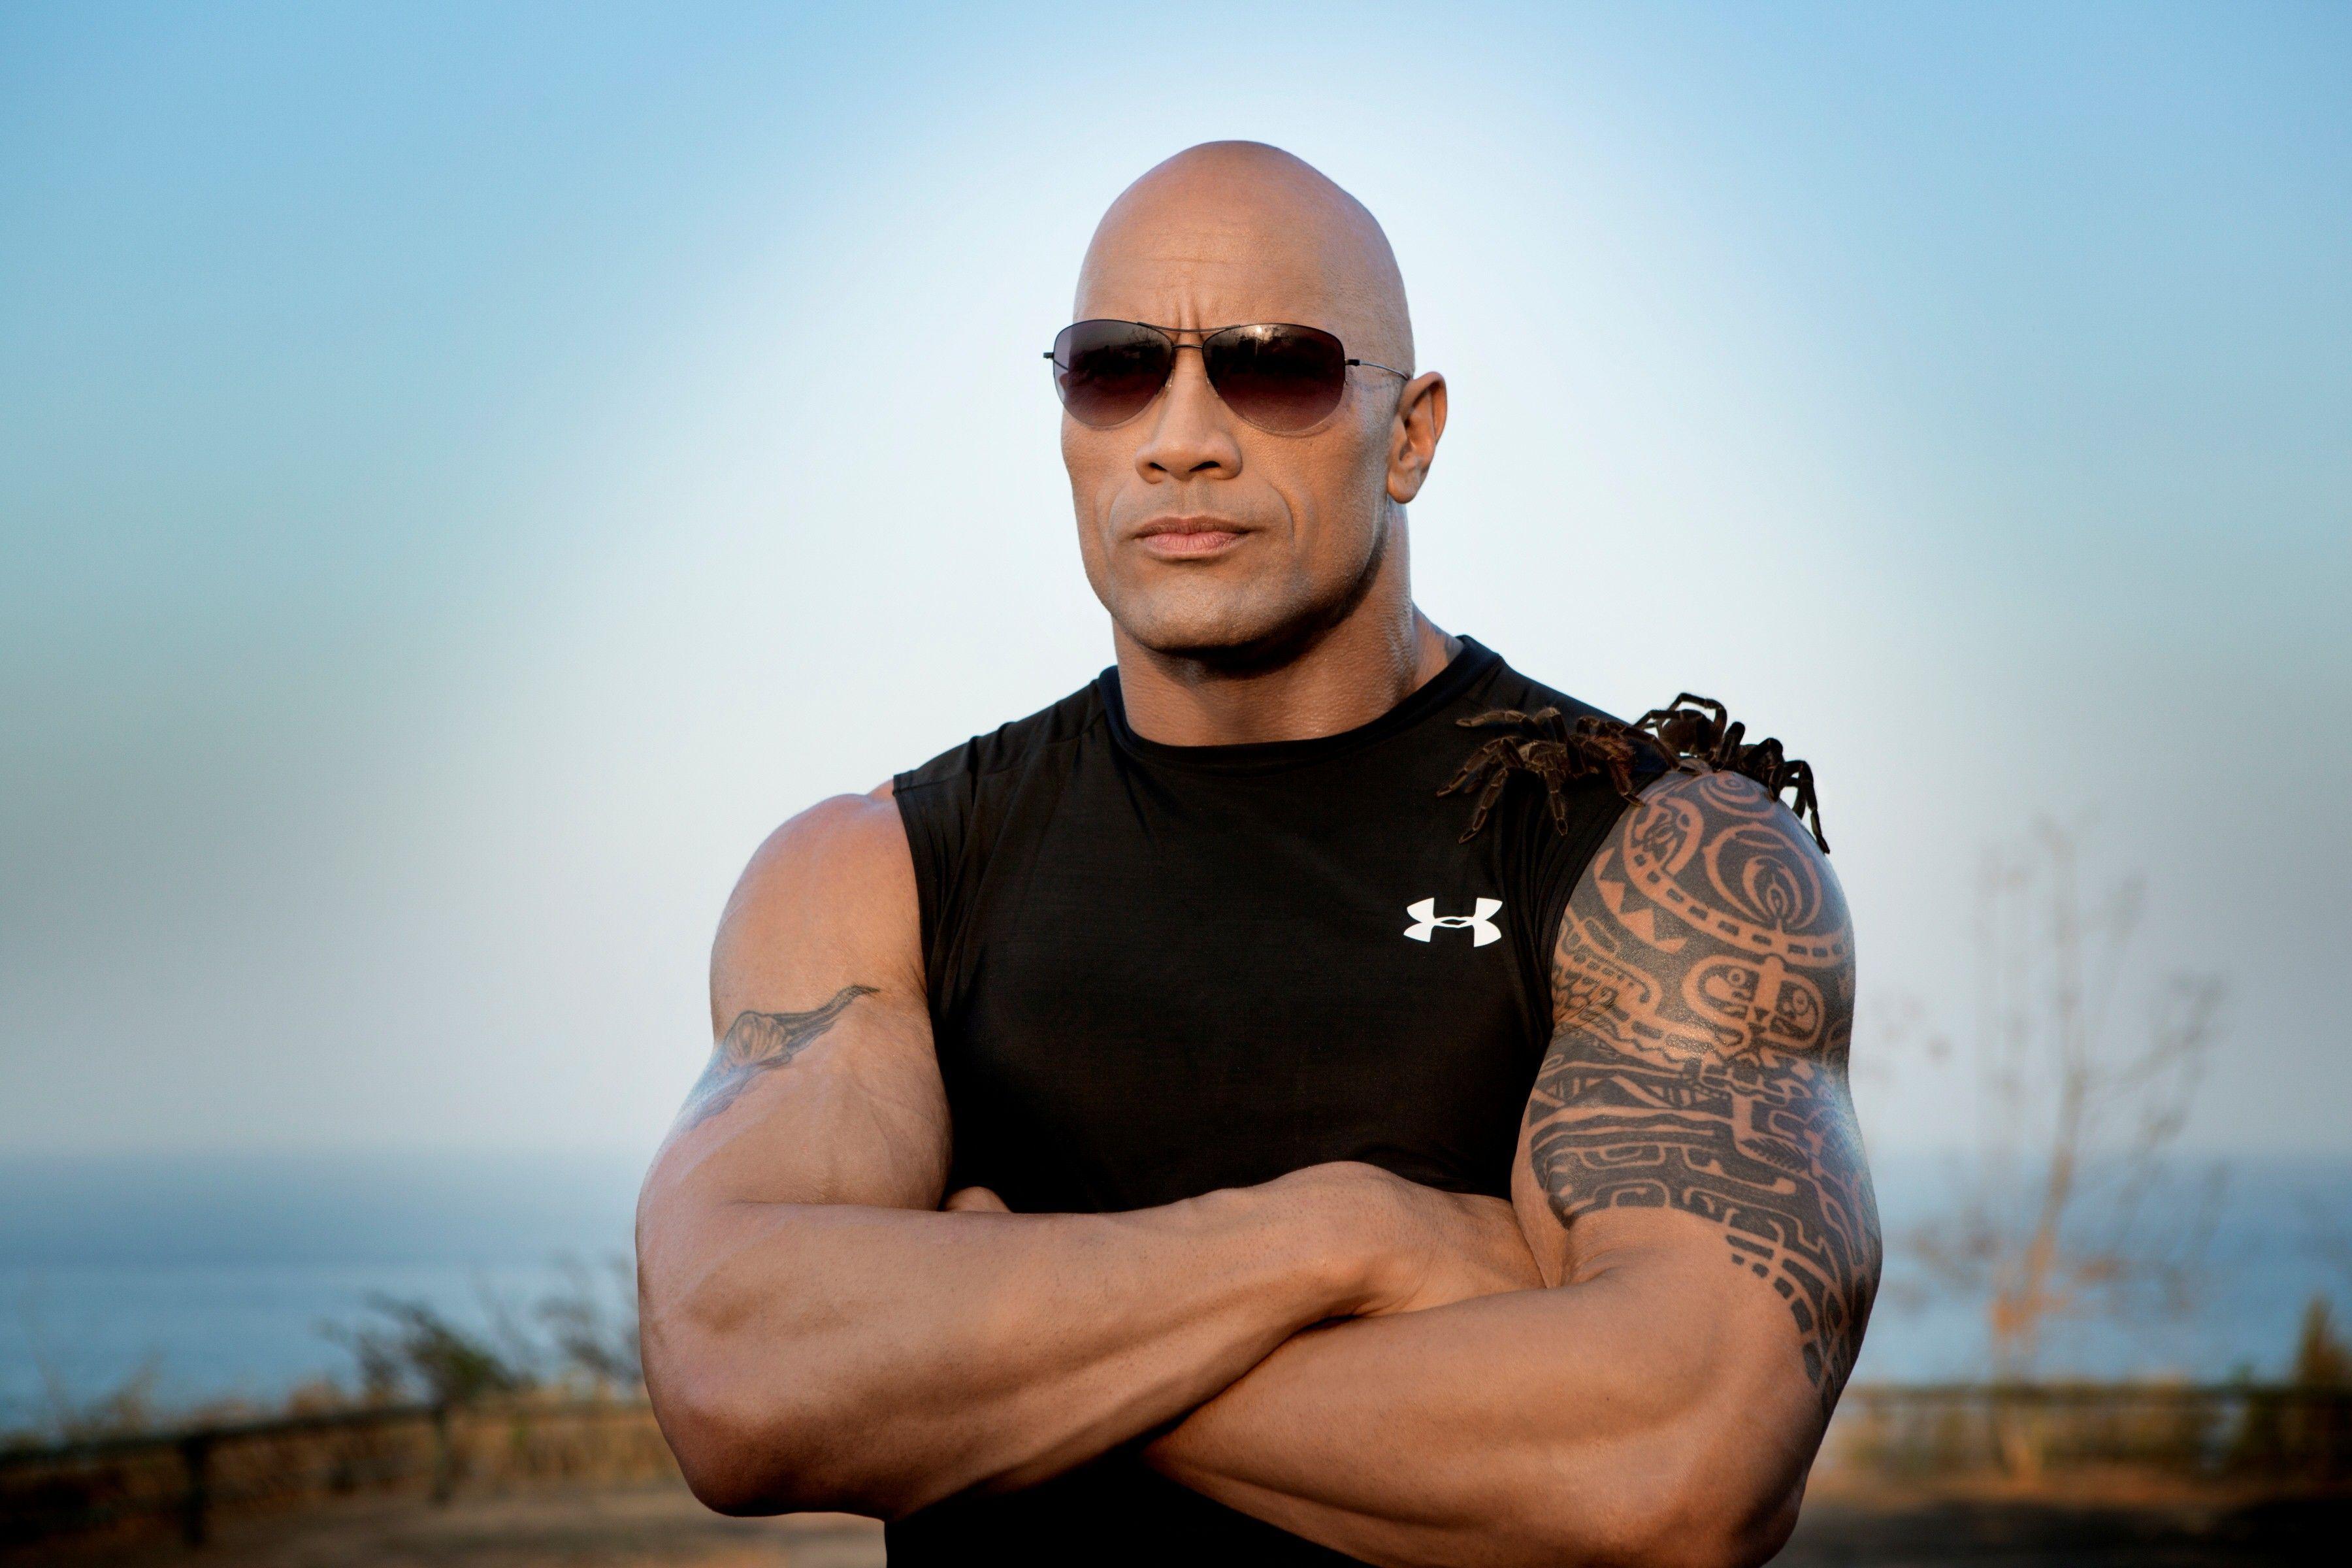 The Rock Dwayne Johnson Wallpapers HD Backgrounds.